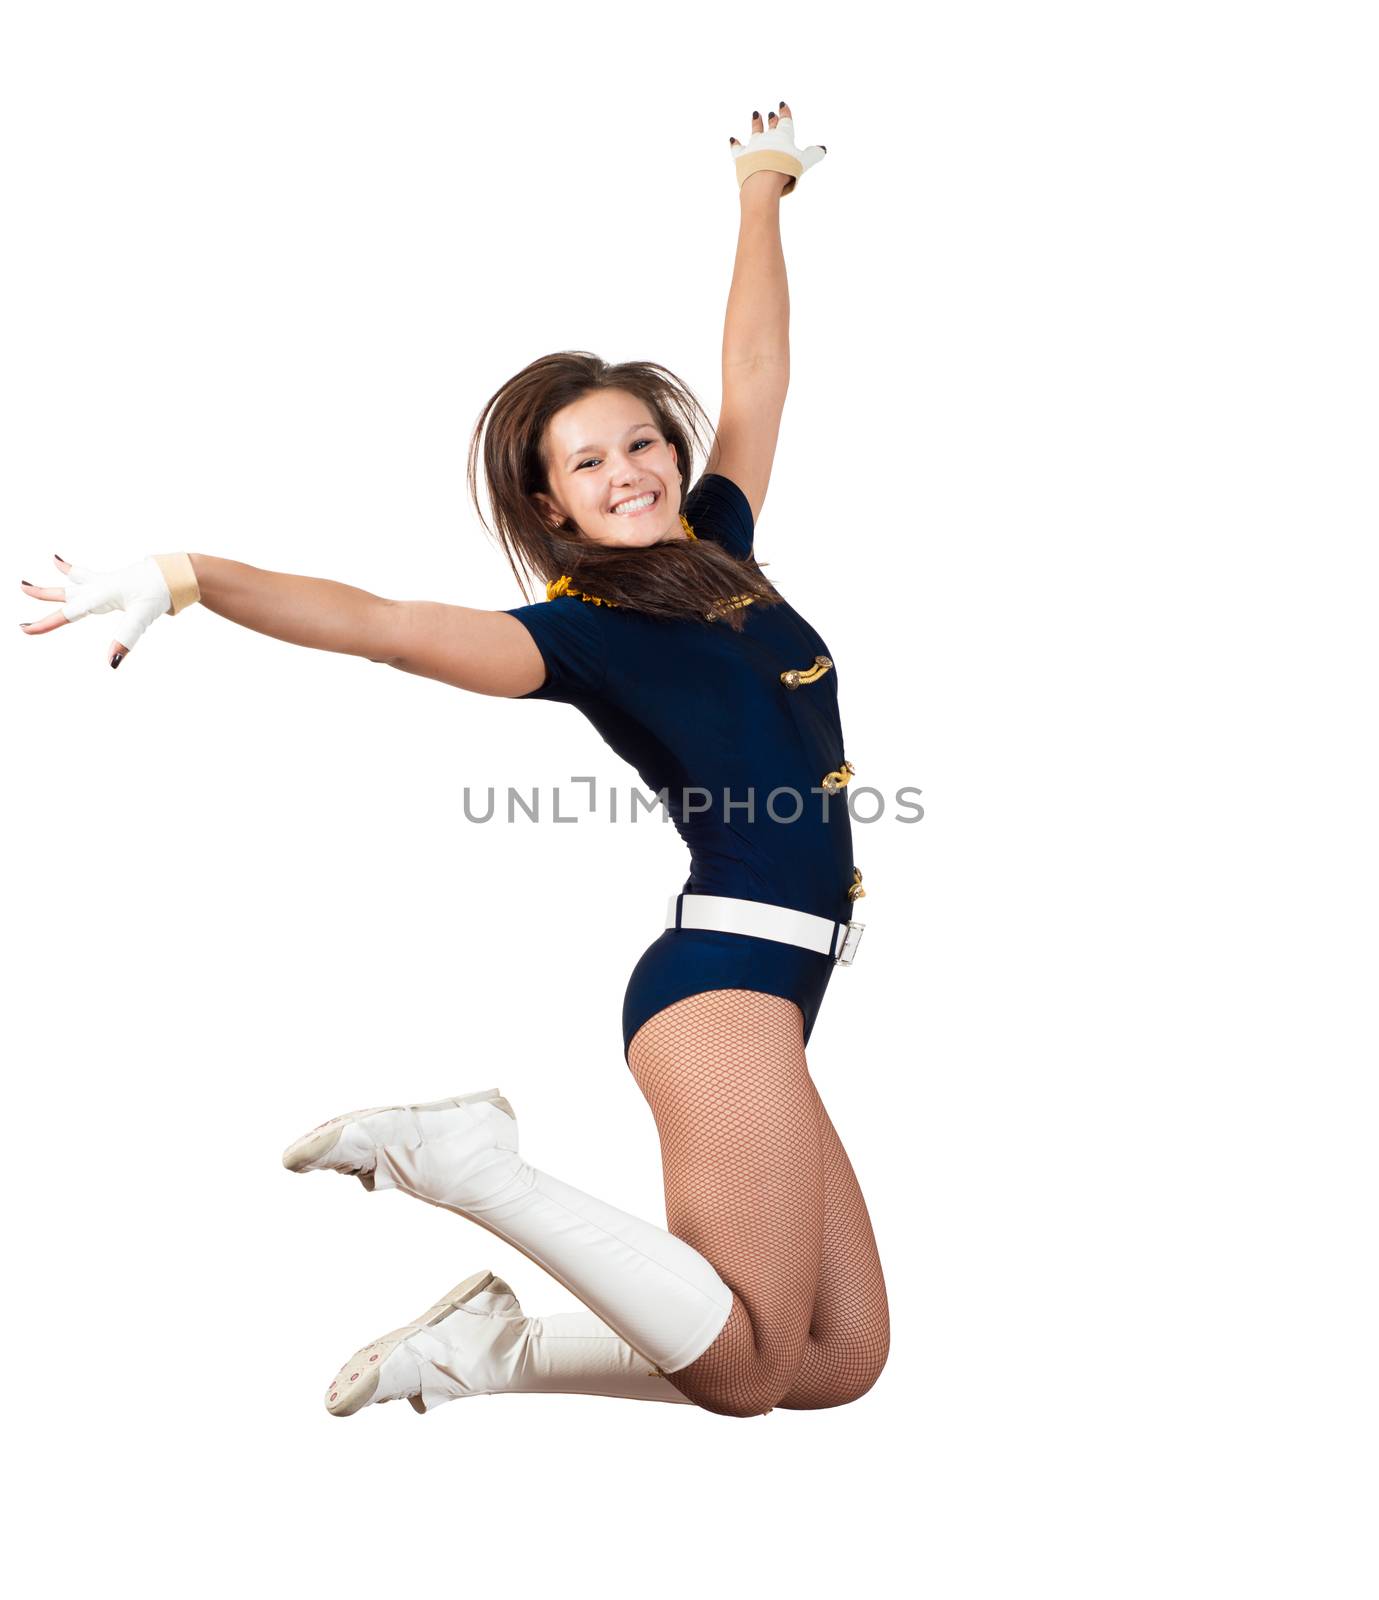 image of a athletic young woman jumping, isolated on white background